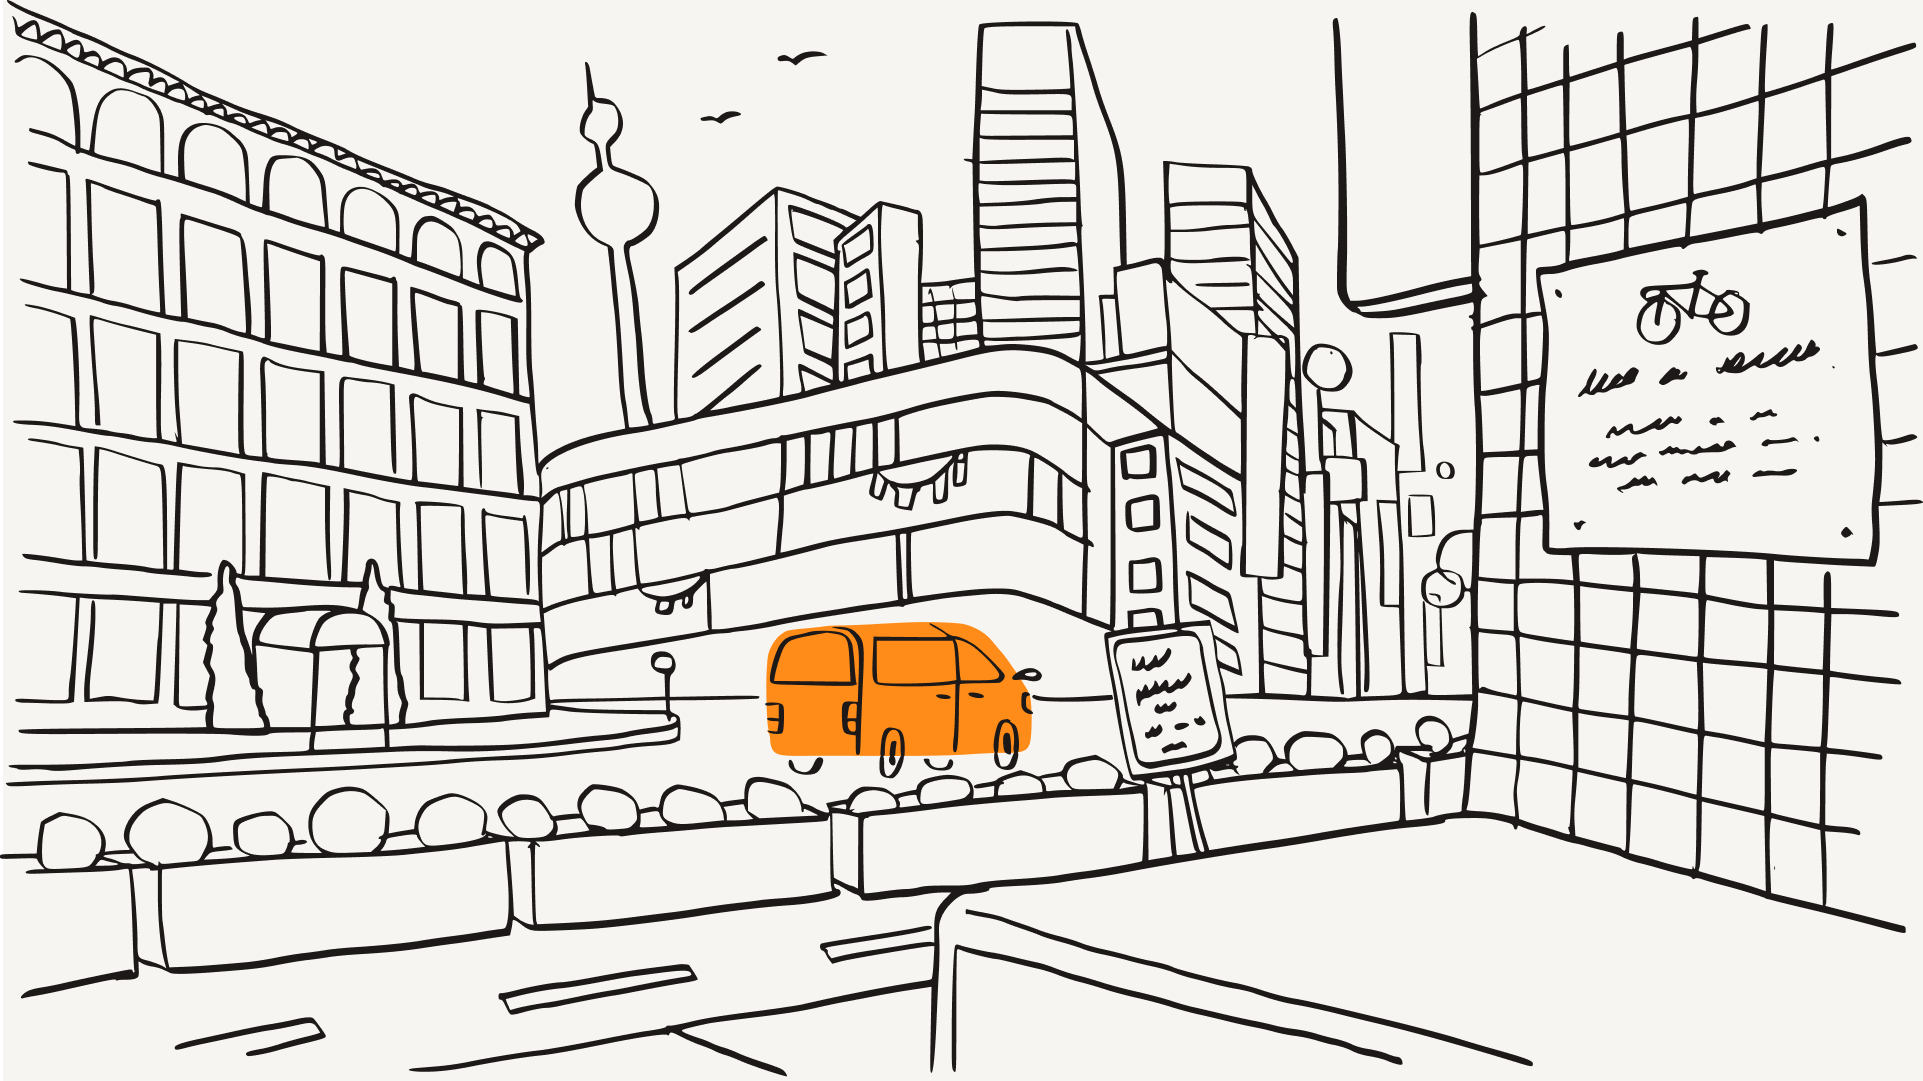 An illustration of a car in a city centre